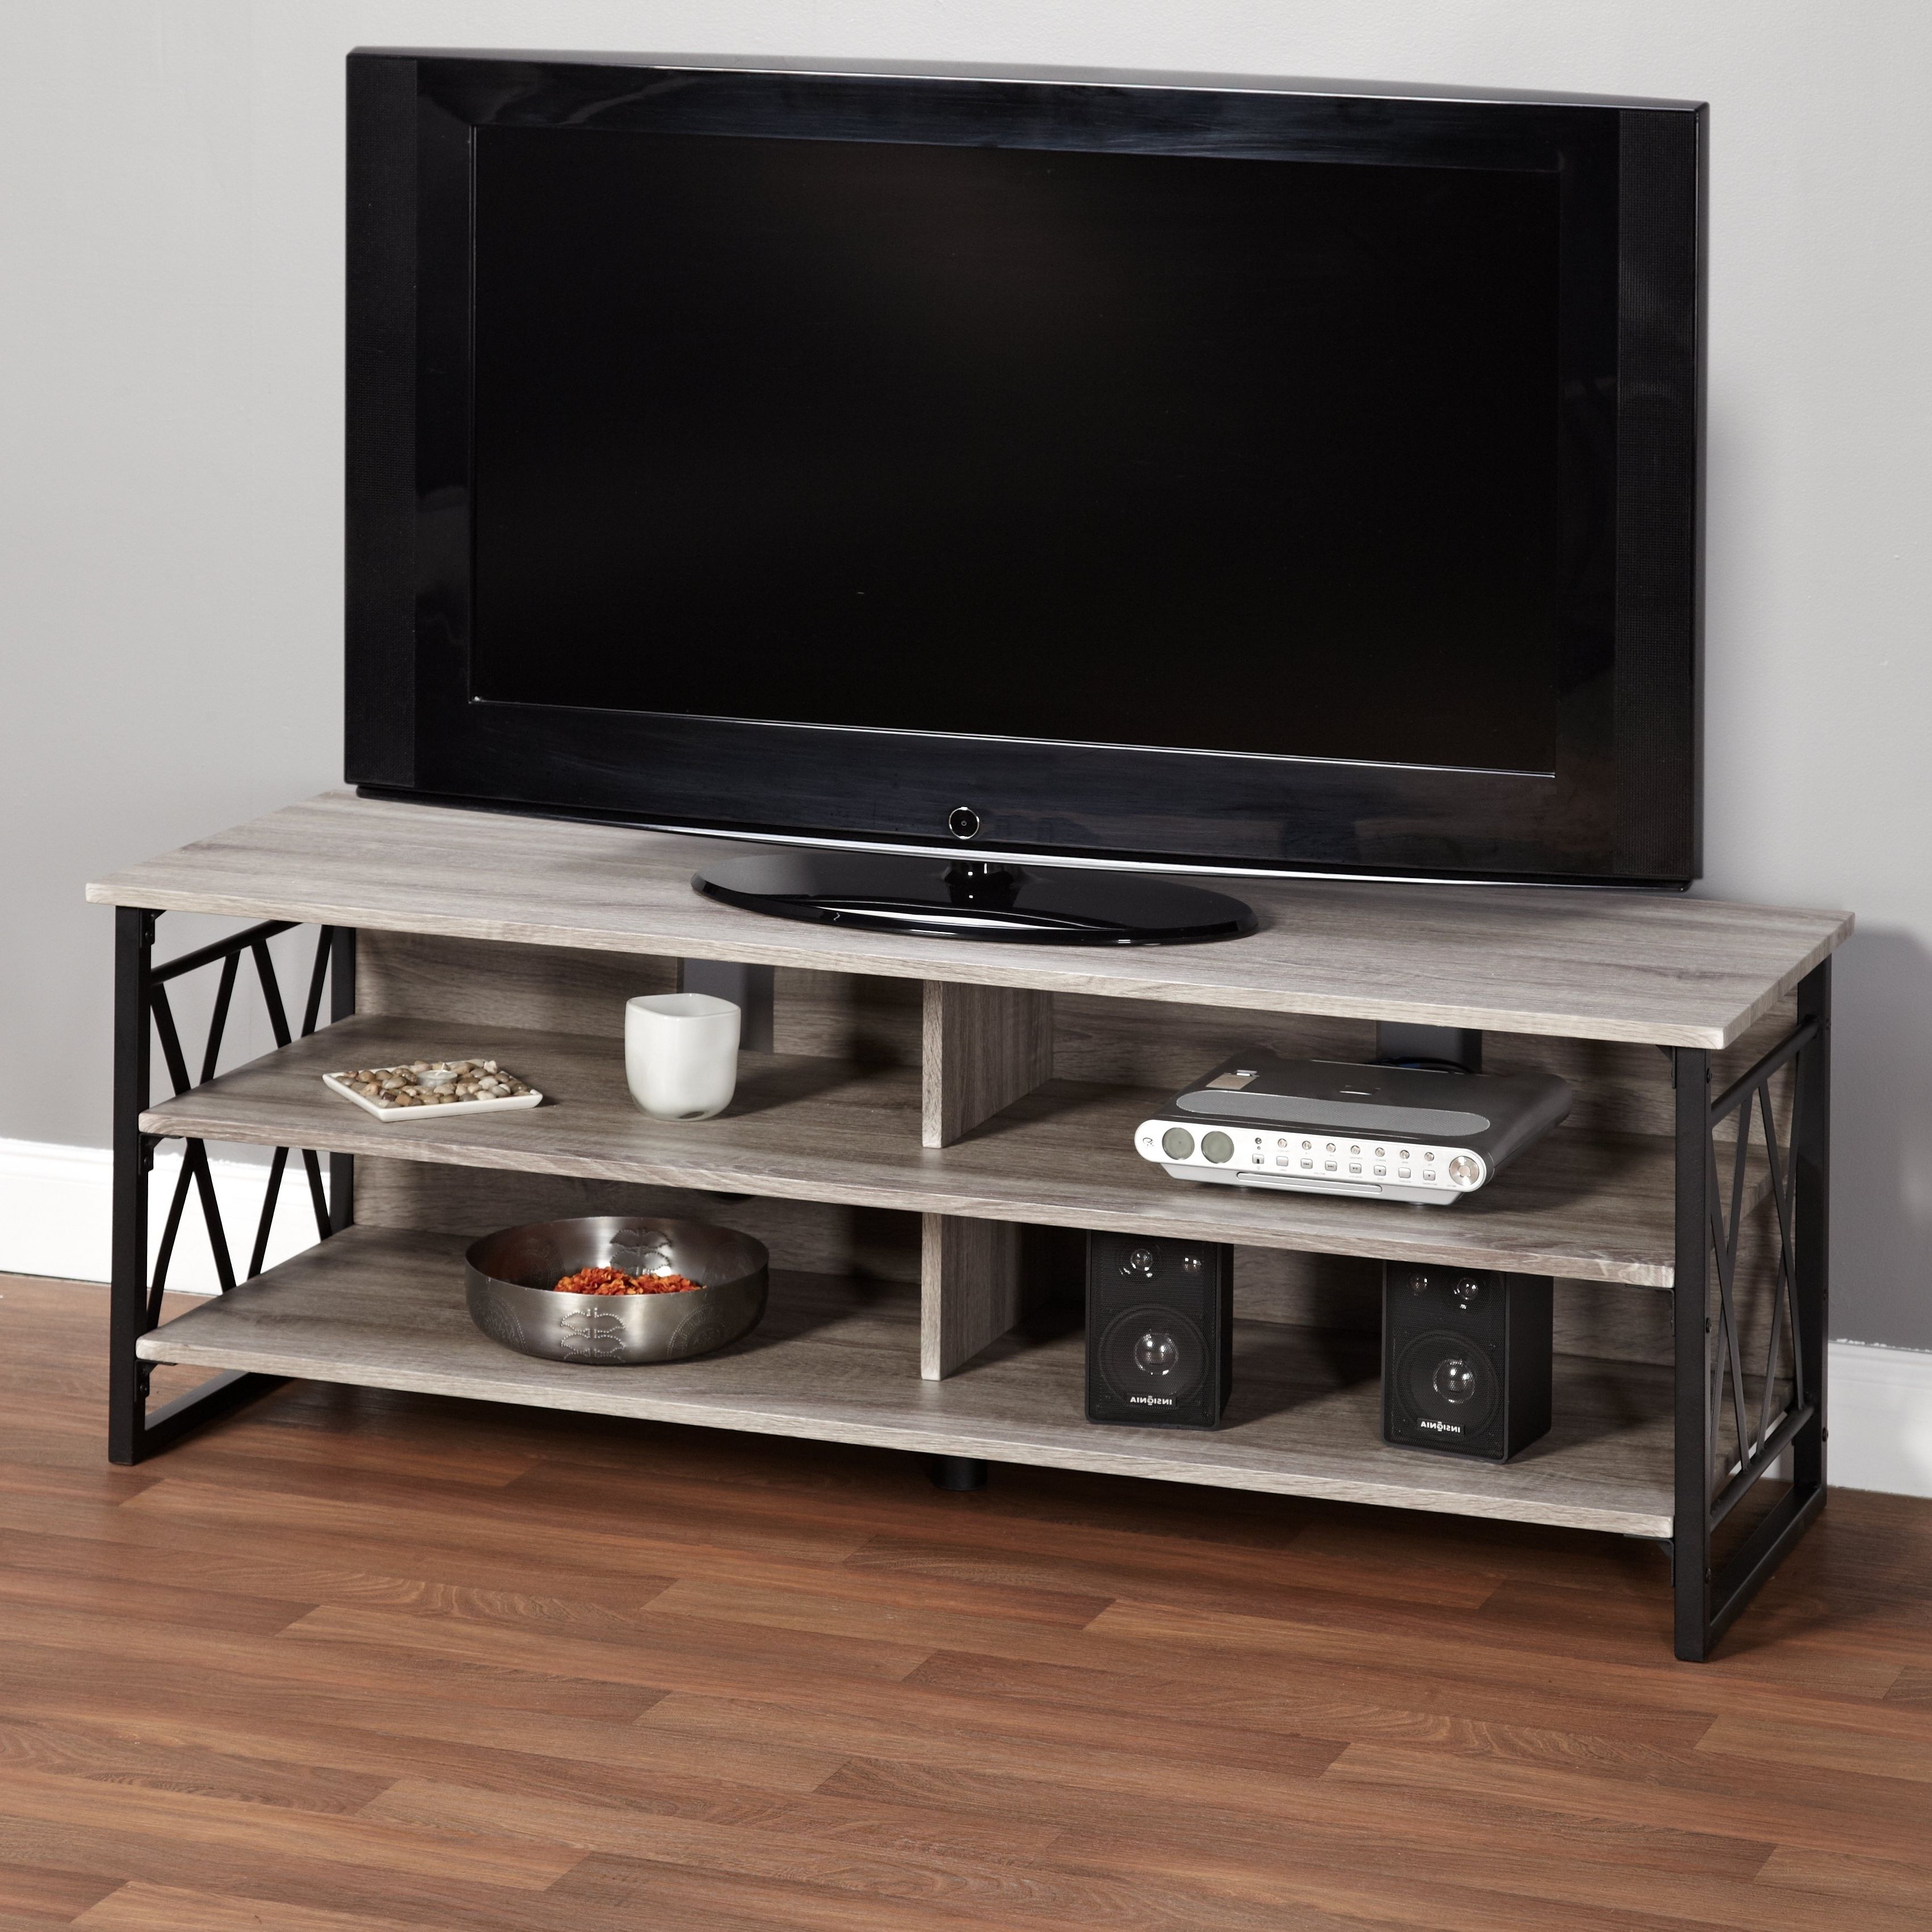 Shop Simple Living Seneca Xx 60 Inch Black/ Grey Rustic Tv Stand Intended For Widely Used Rustic 60 Inch Tv Stands (View 5 of 20)